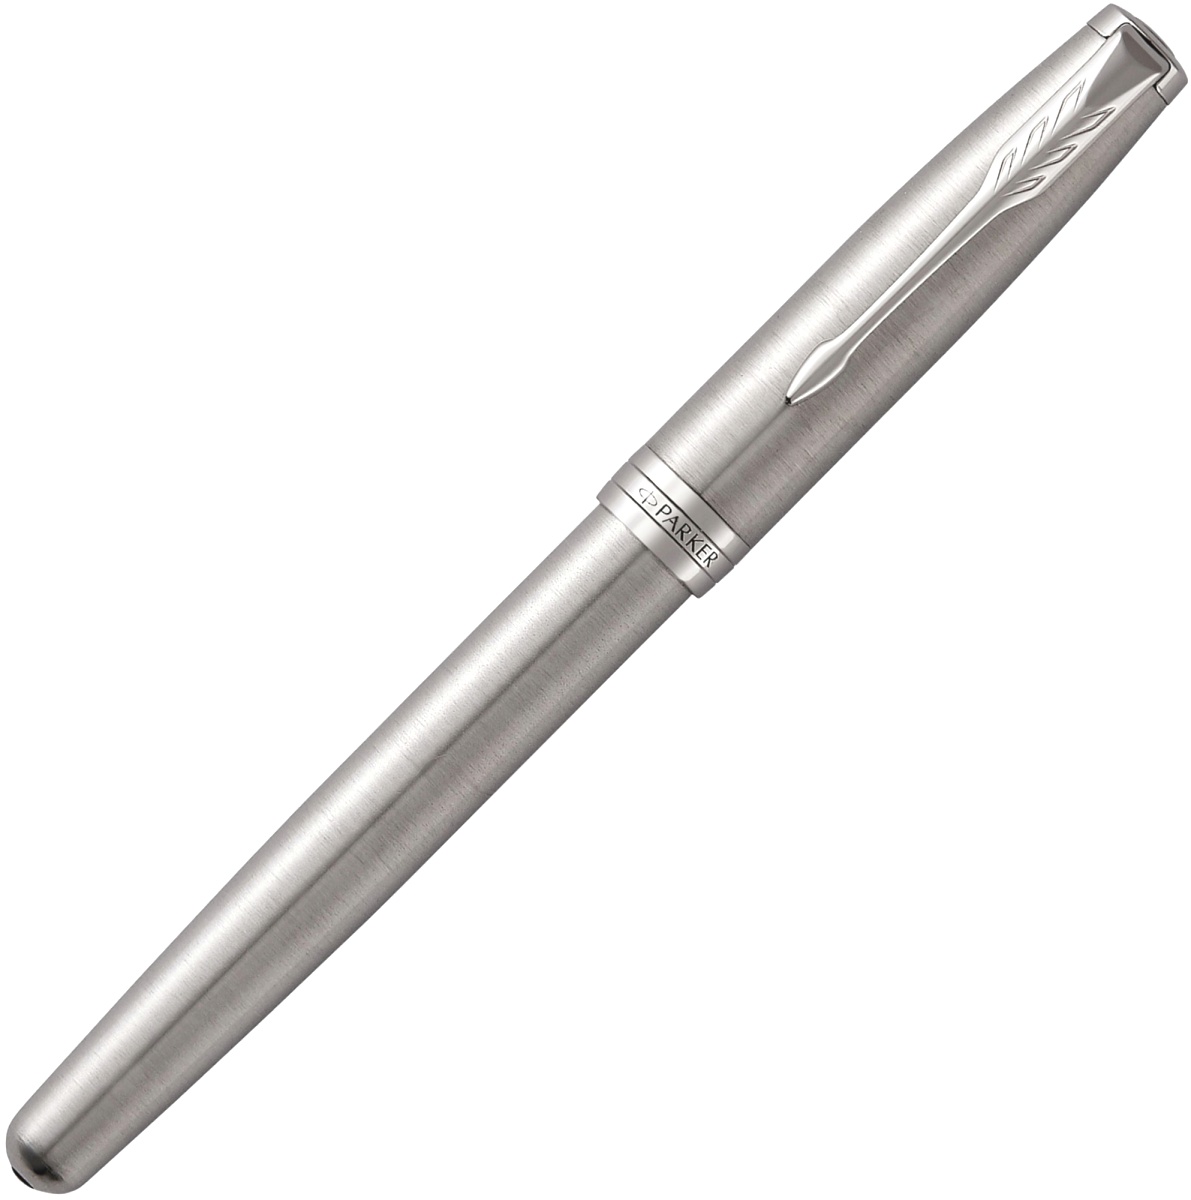  Ручка-роллер Parker Sonnet Core T526, Stainless Steel CT, фото 2